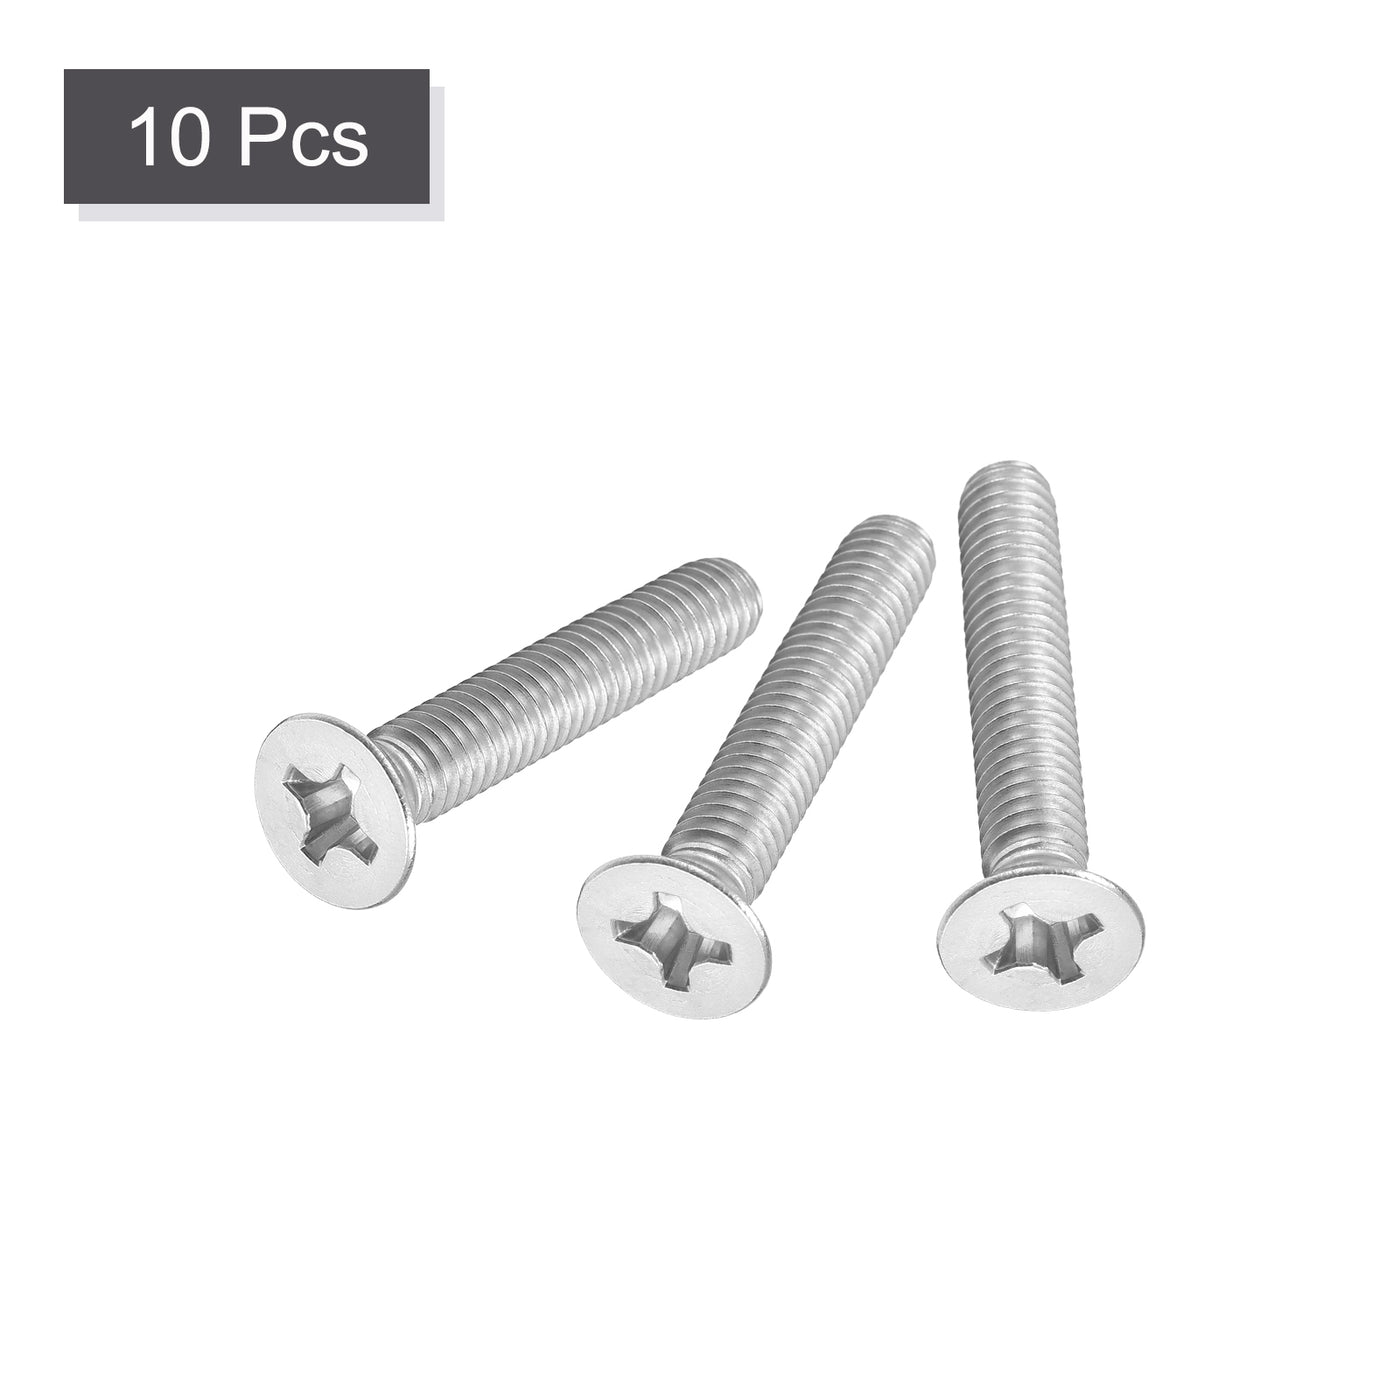 uxcell Uxcell 5/16-18x2" Flat Head Machine Screws Phillips 304 Stainless Steel Bolts 10pcs